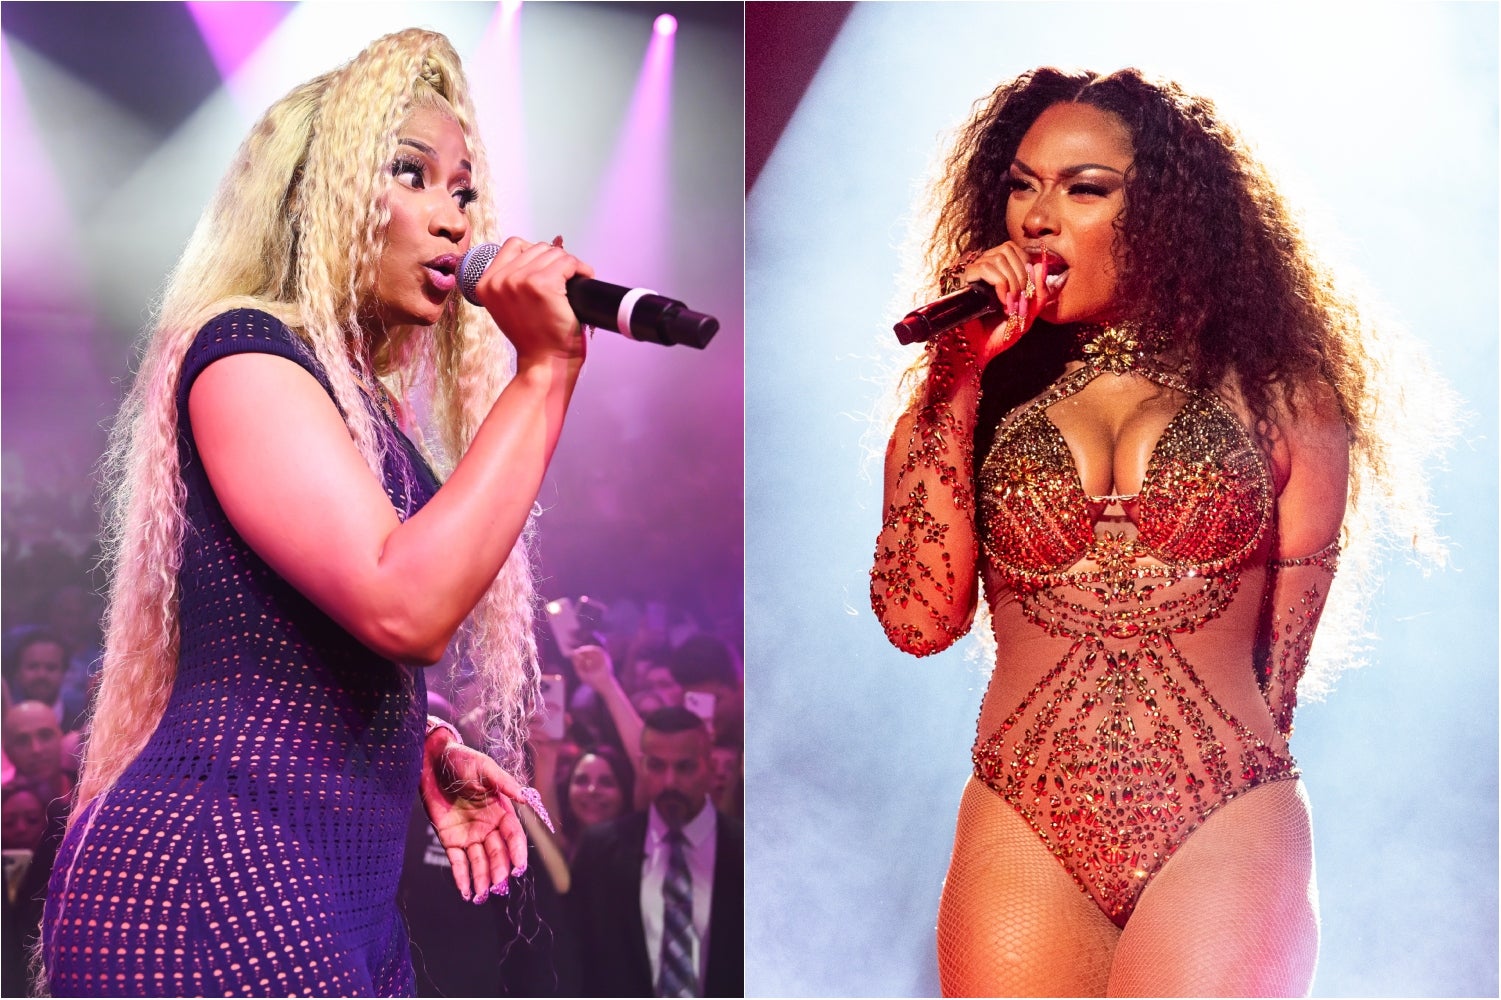 Op-Ed: The Celebrity Worship We're Witnessing Is More Concerning Than The Nicki Minaj, Megan Thee Stallion Beef 